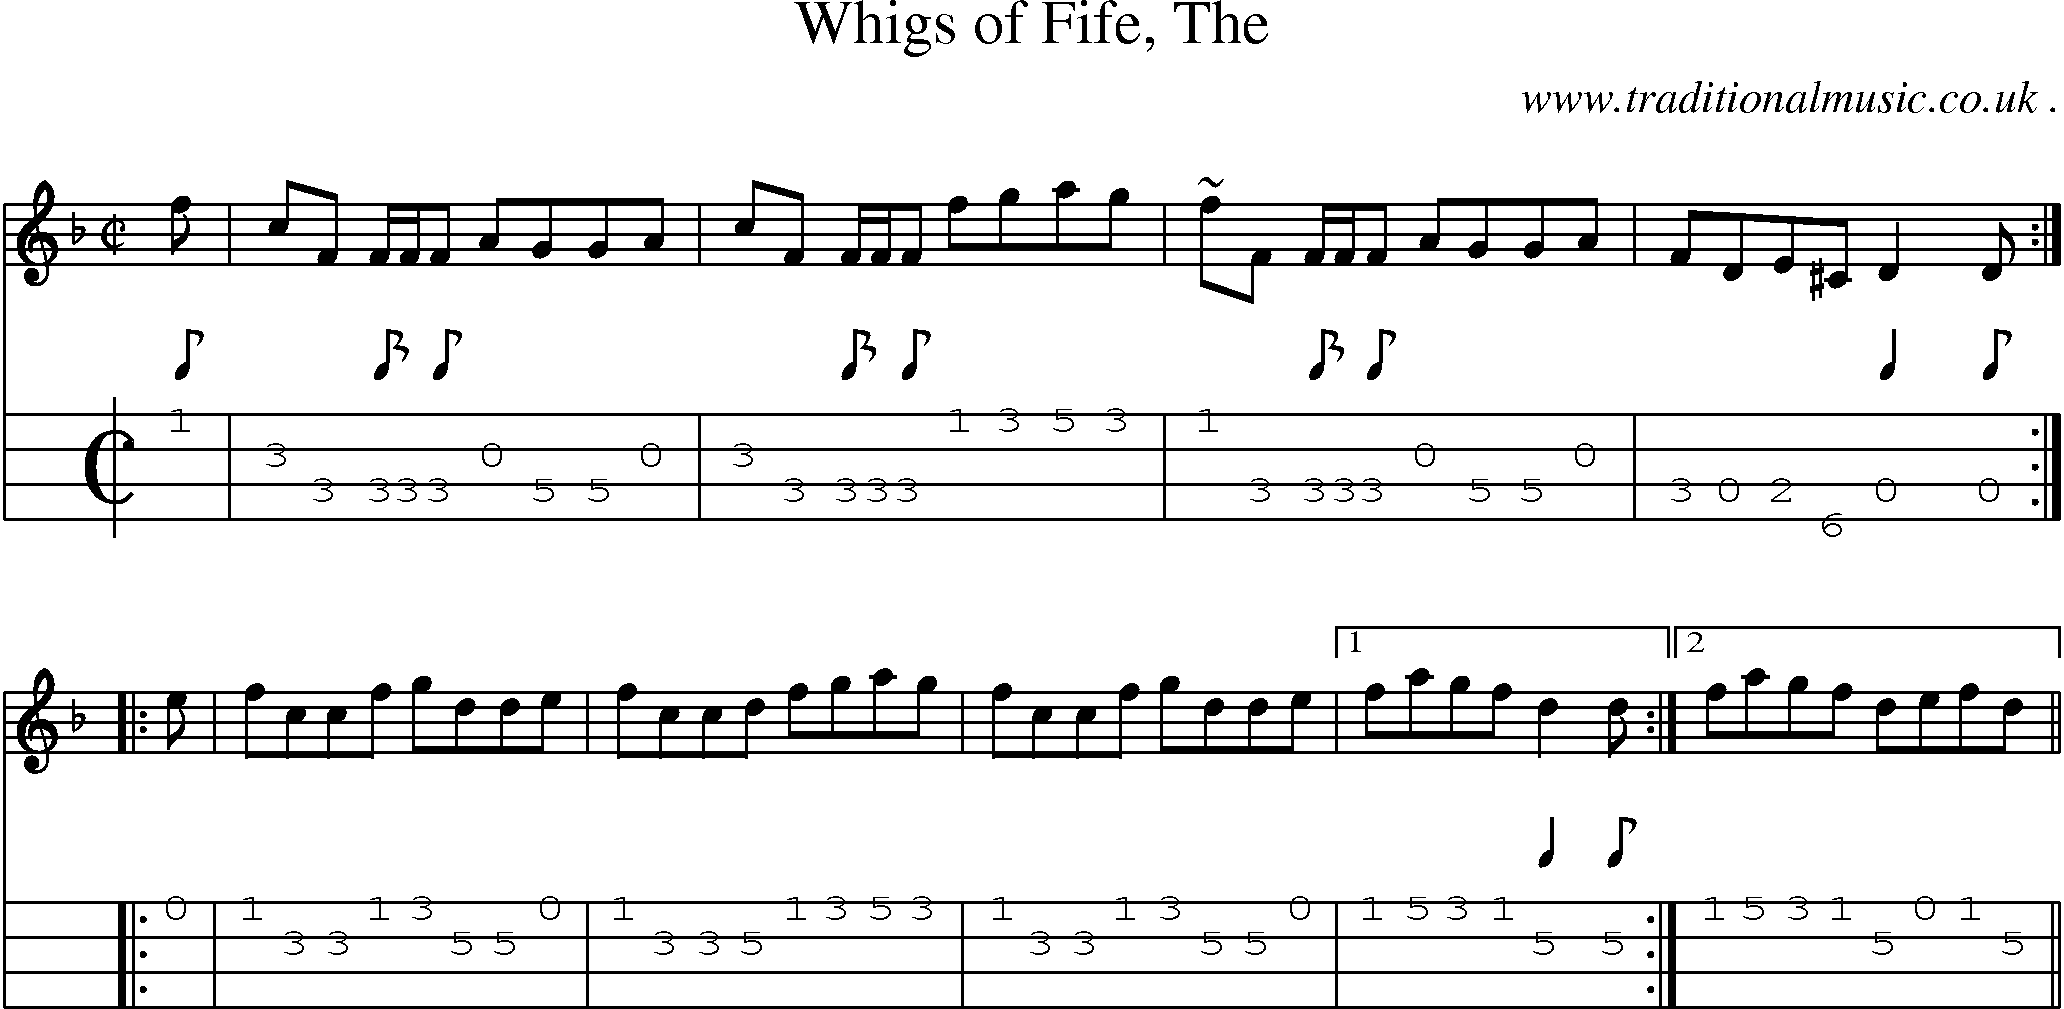 Sheet-music  score, Chords and Mandolin Tabs for Whigs Of Fife The